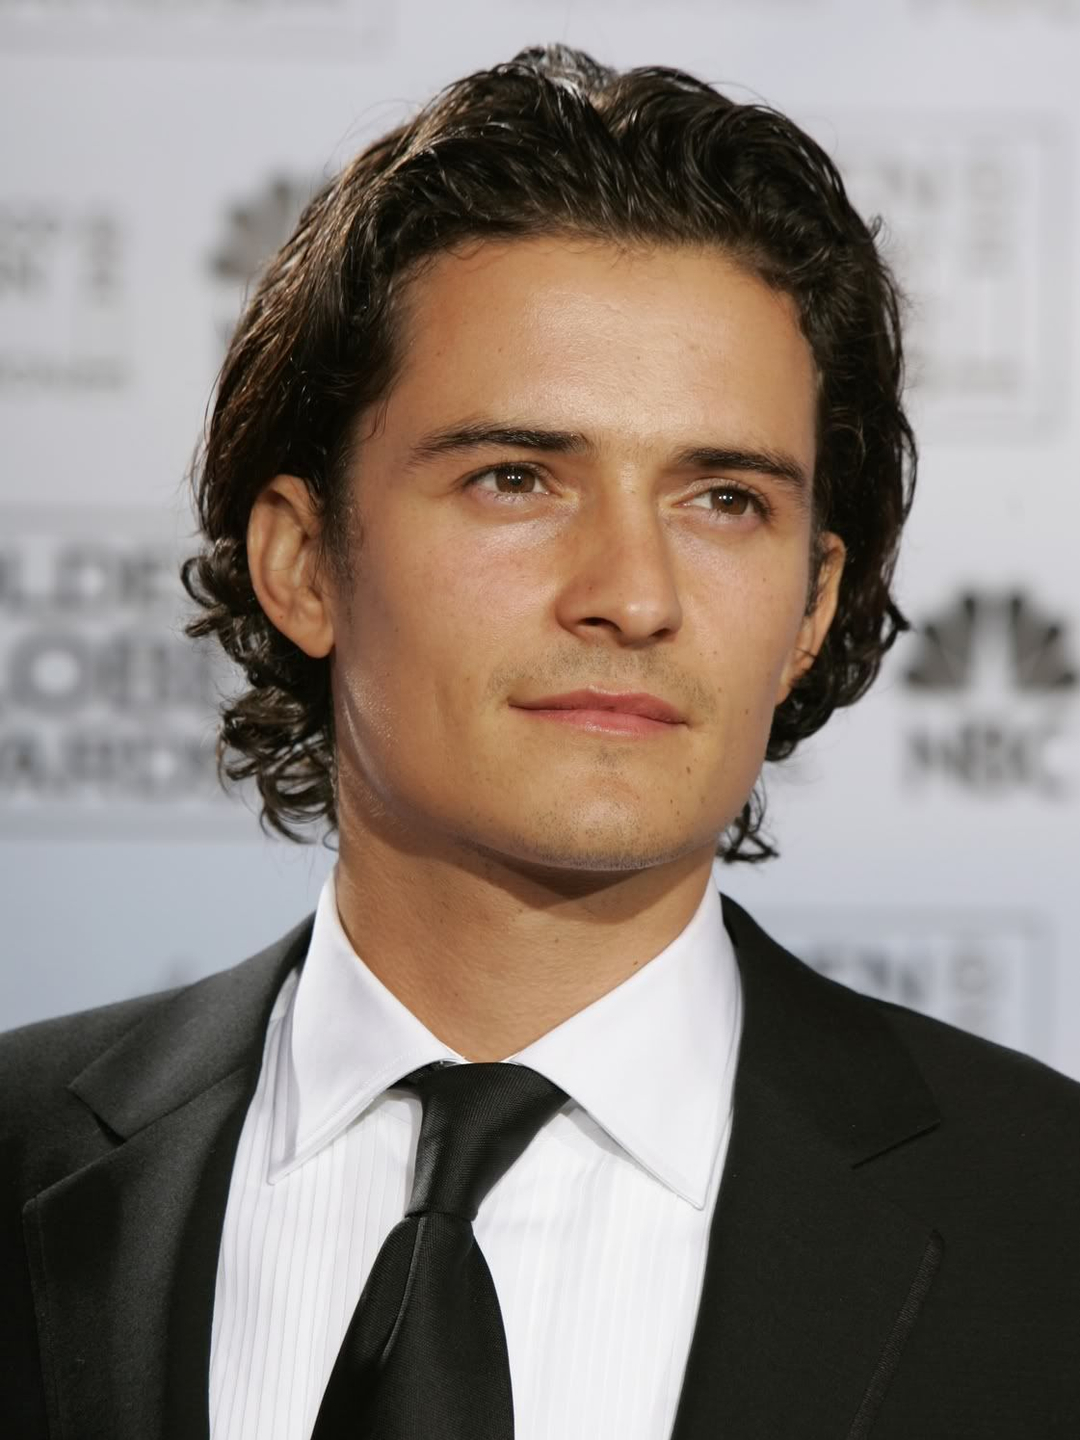 Orlando Bloom where is he now